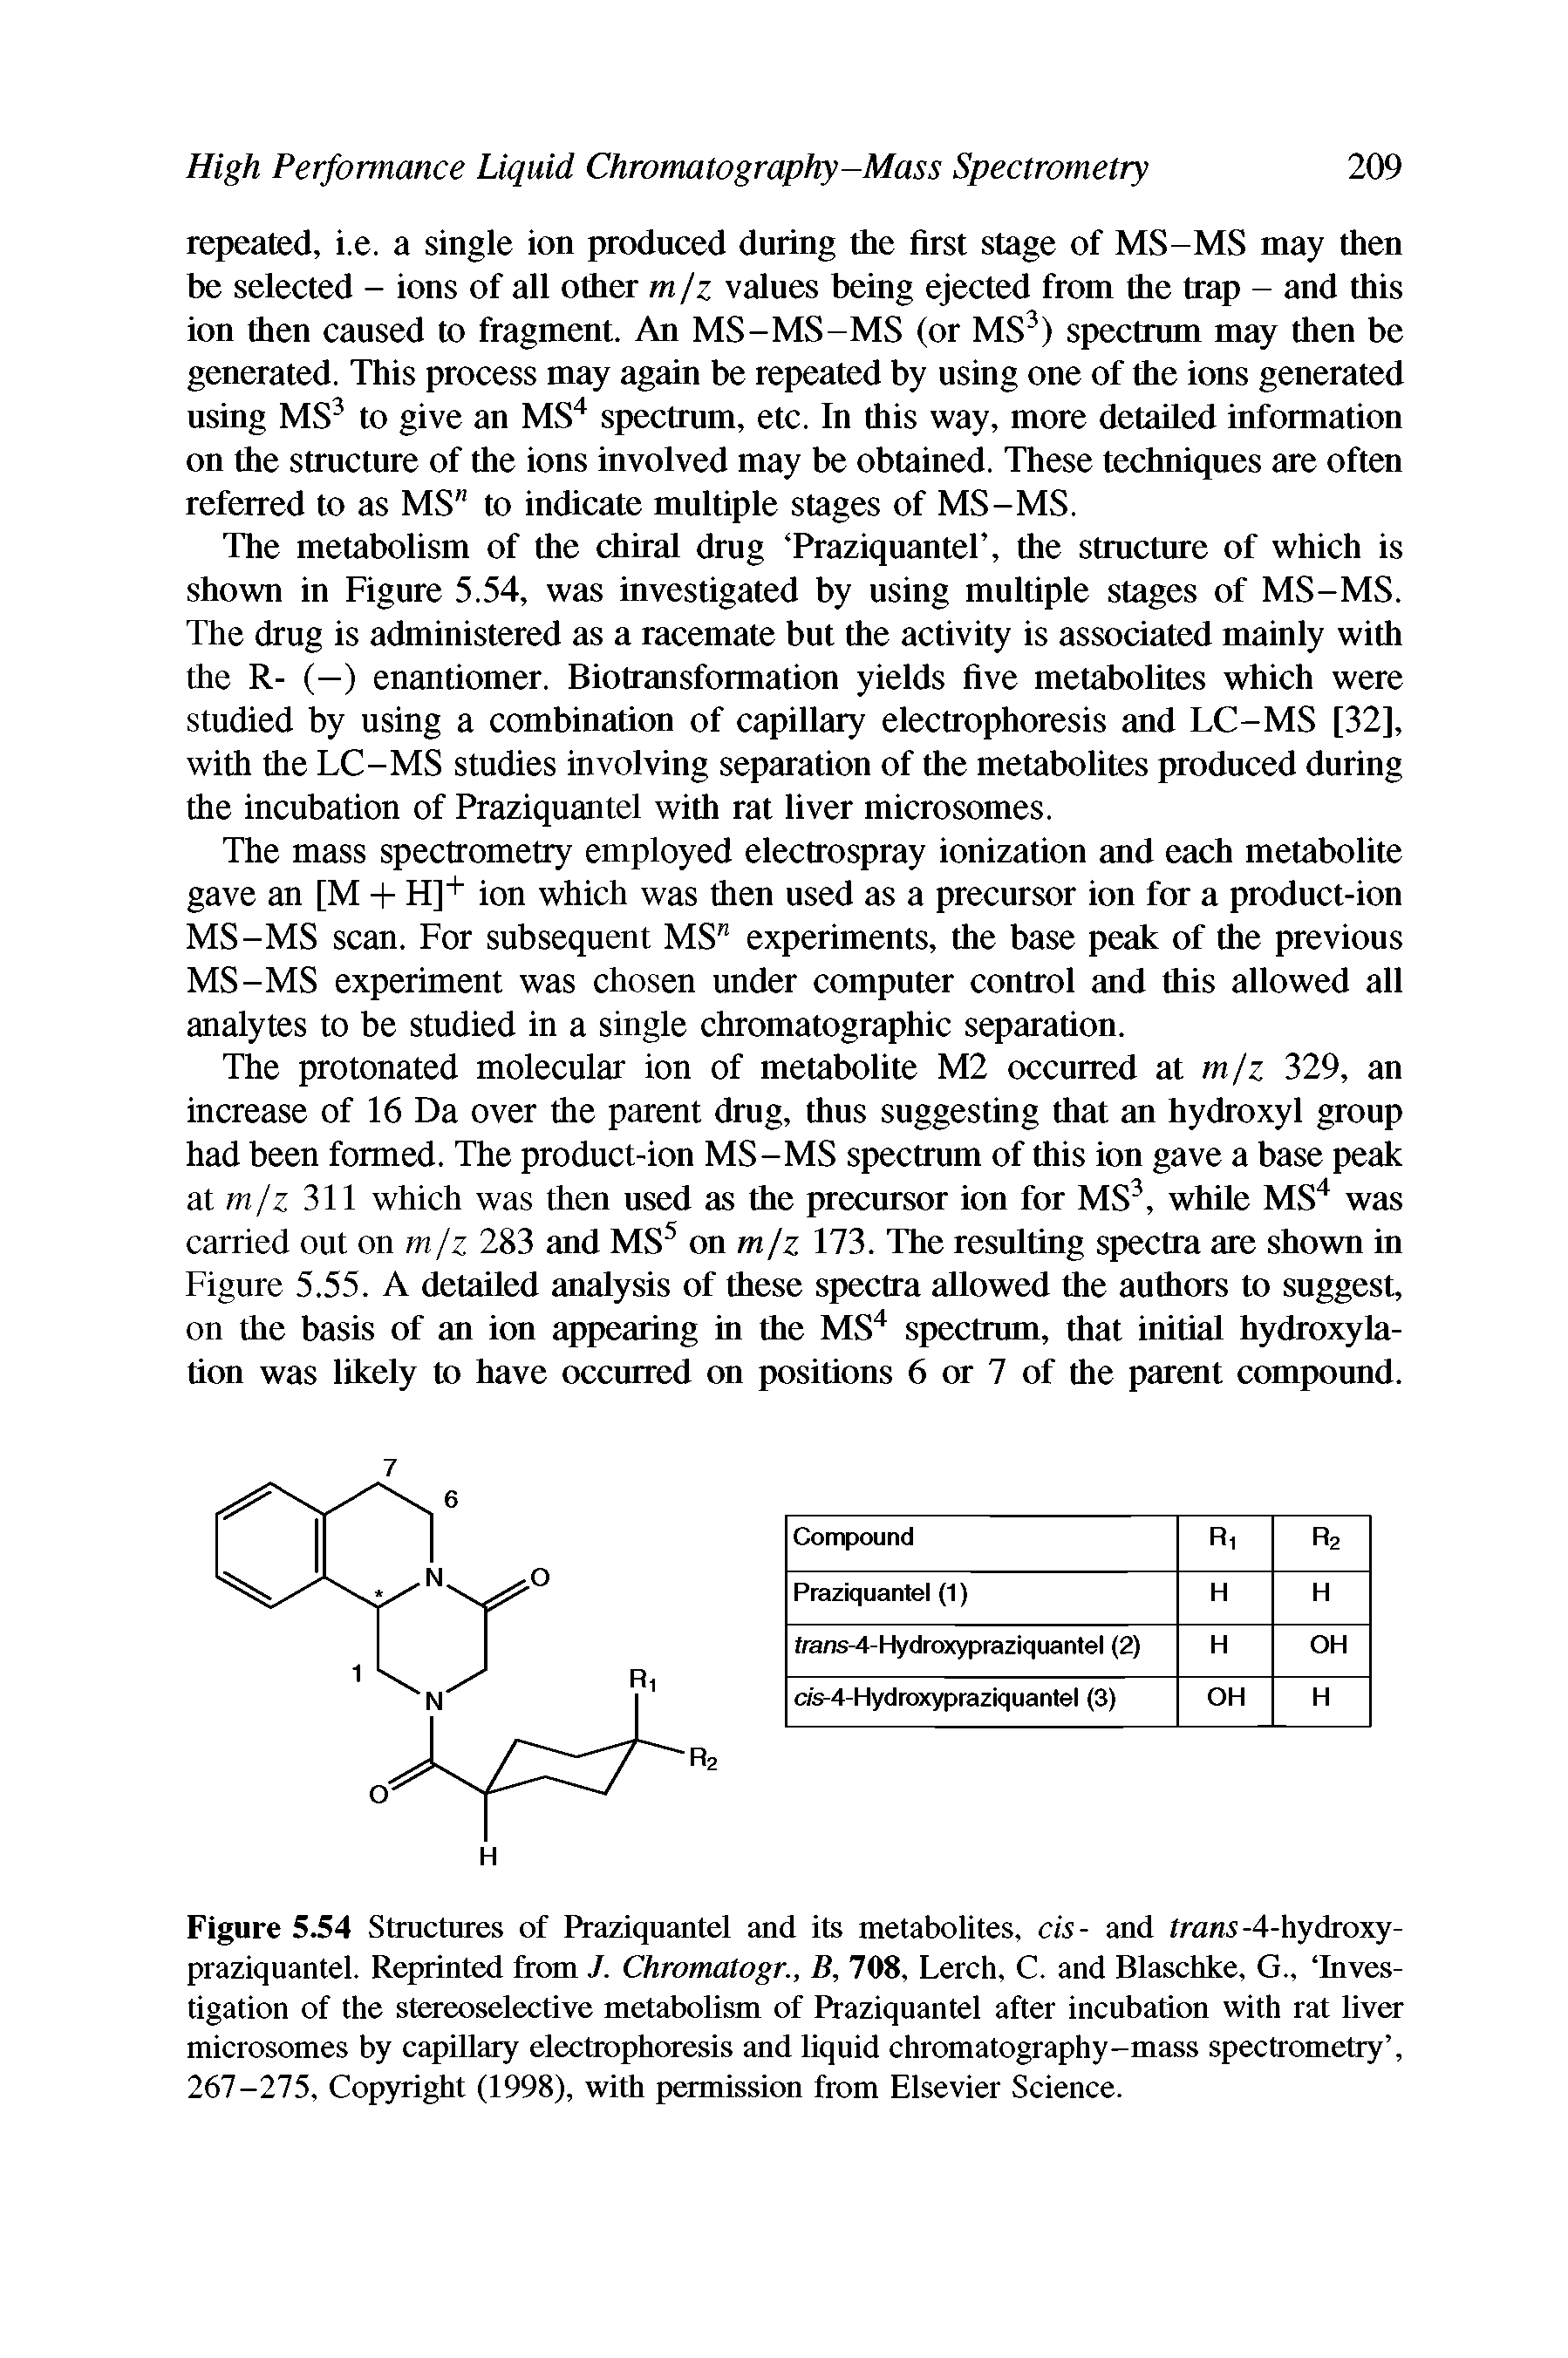 Figure 5.54 Structures of Praziquantel and its metabolites, cis- and fraw5-4-hydroxy-praziquantel. Reprinted from 7. Chromatogr., B, 708, Lerch, C. and Blaschke, G., Investigation of the stereoselective metabolism of Praziquantel after incubation with rat liver microsomes by capillary electrophoresis and liquid chromatography-mass spectrometry , 267-275, Copyright (1998), with permission from Elsevier Science.